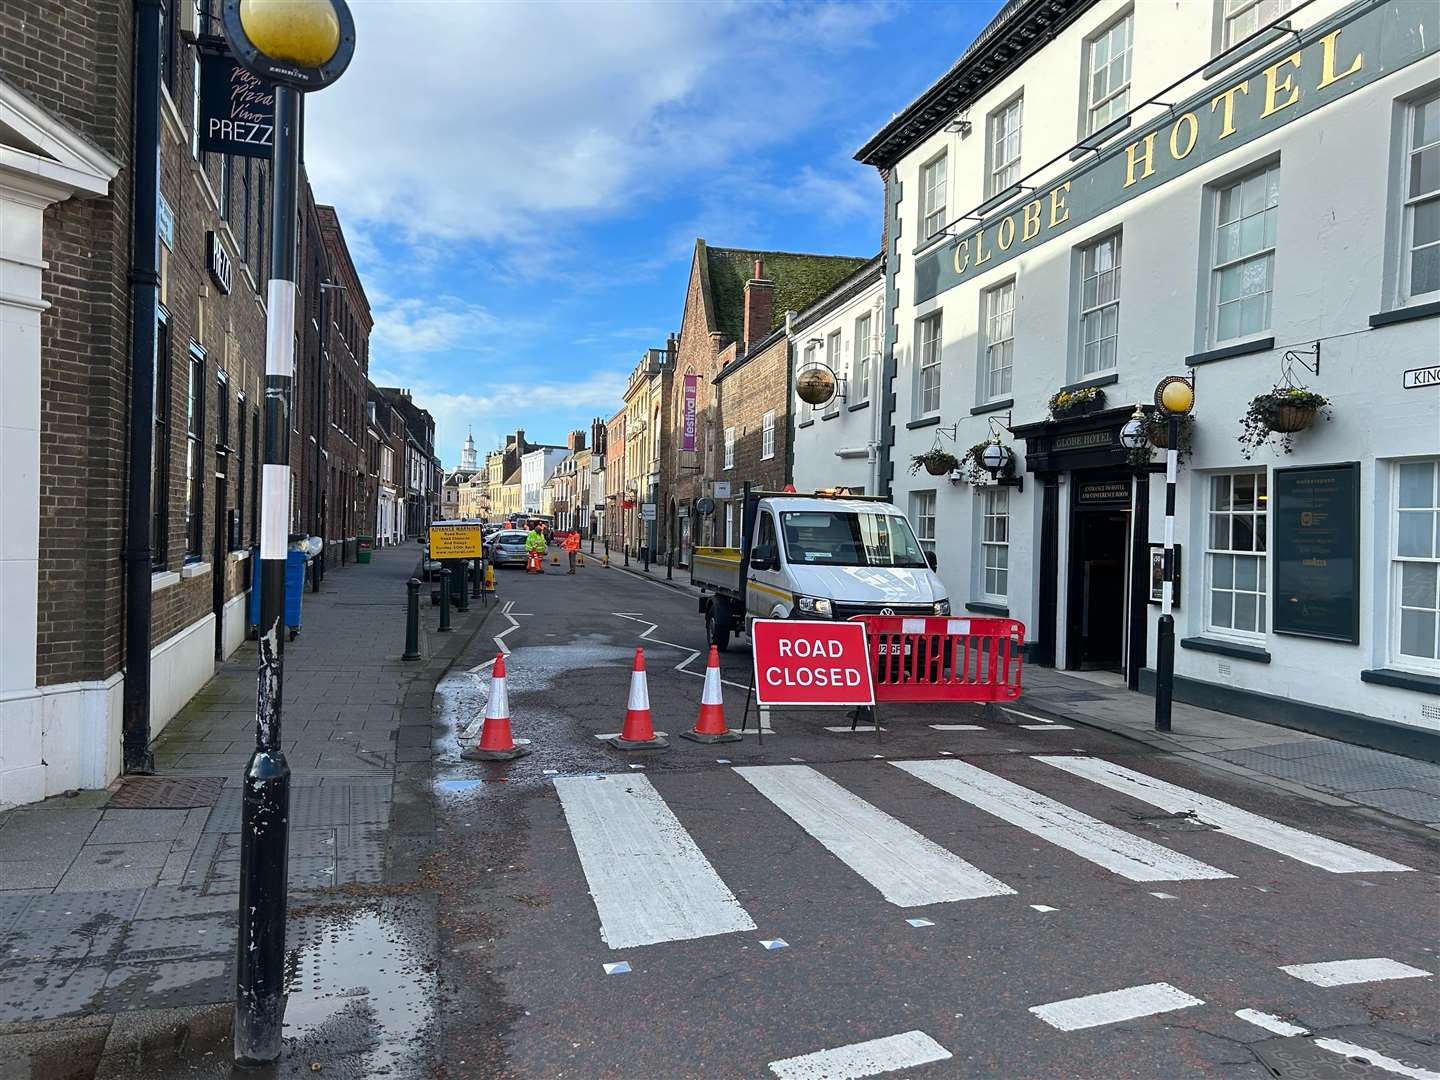 King Street in Lynn was closed while work continued on the sinkhole